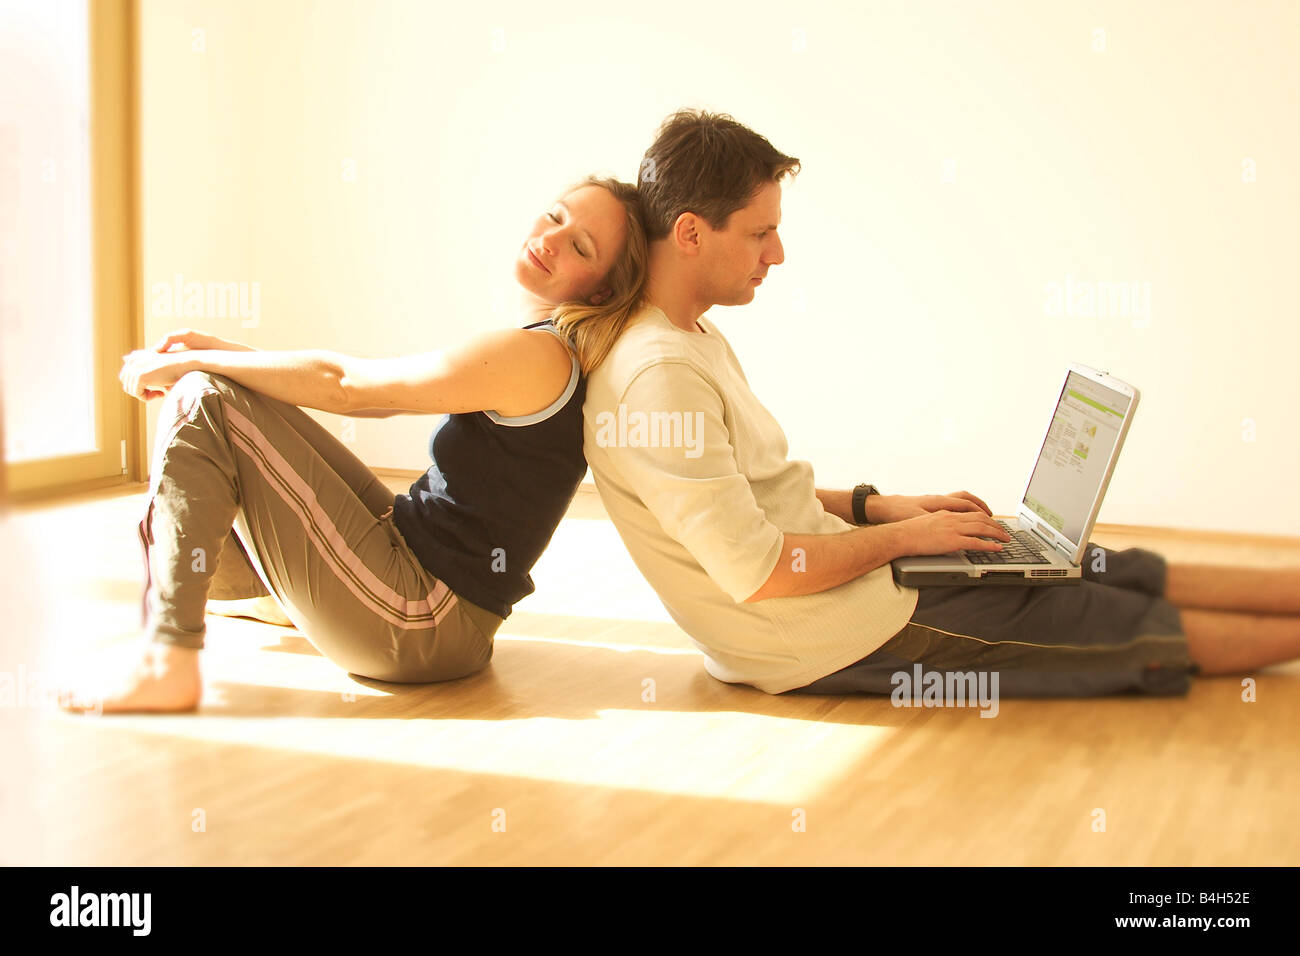 Portrait of young woman leaning against son mari working on laptop Banque D'Images